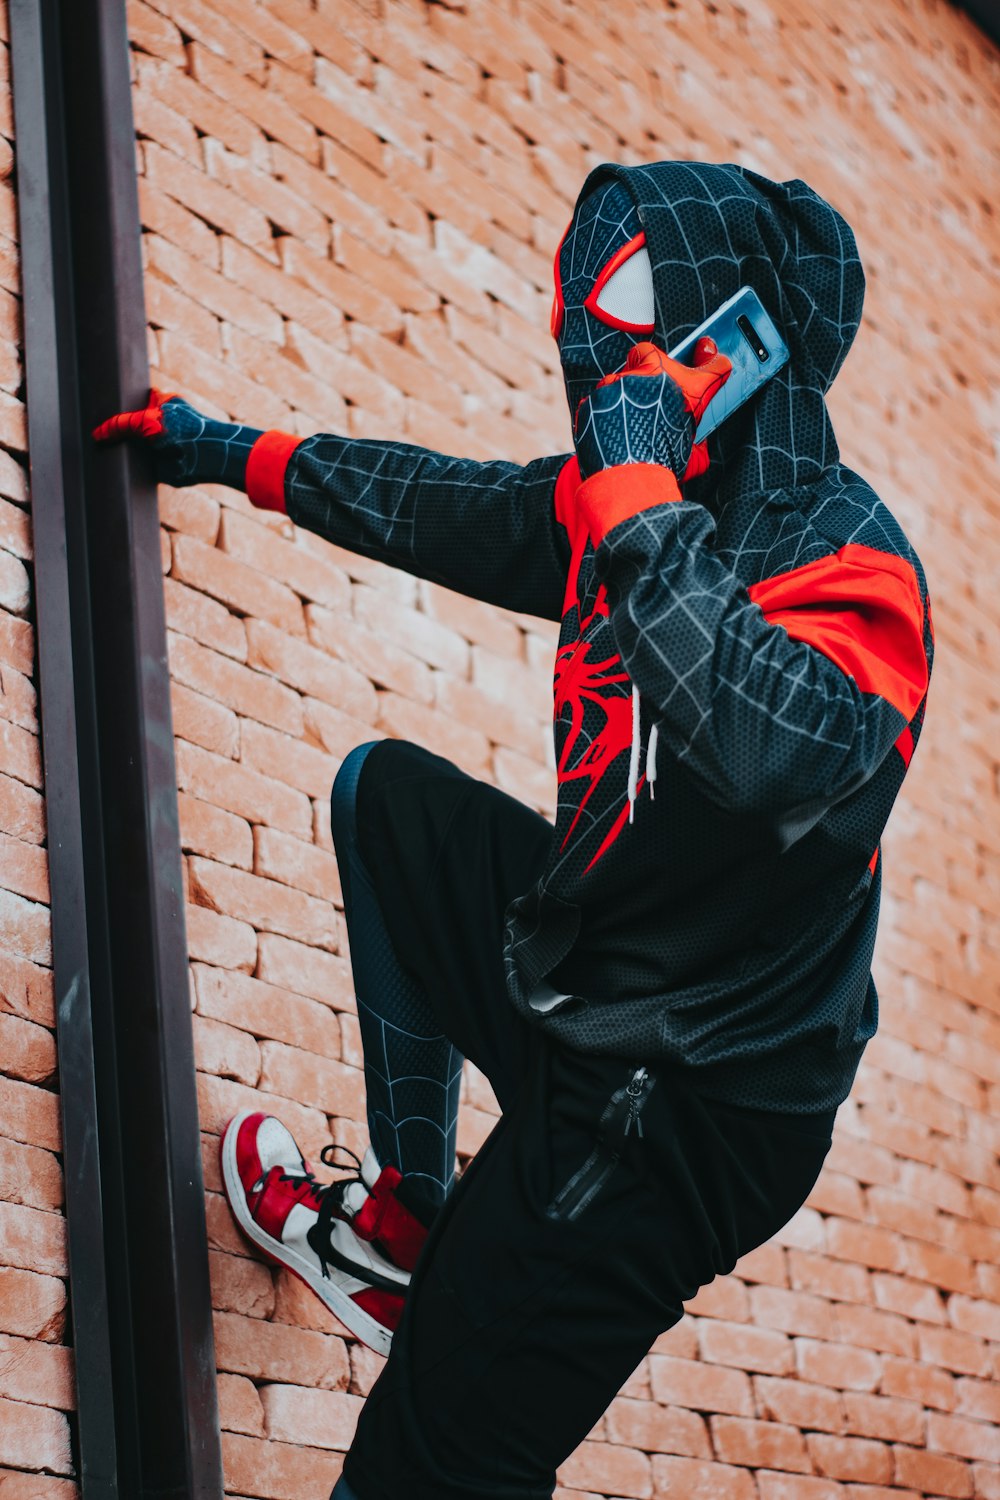 a man in a spider suit is climbing a brick wall